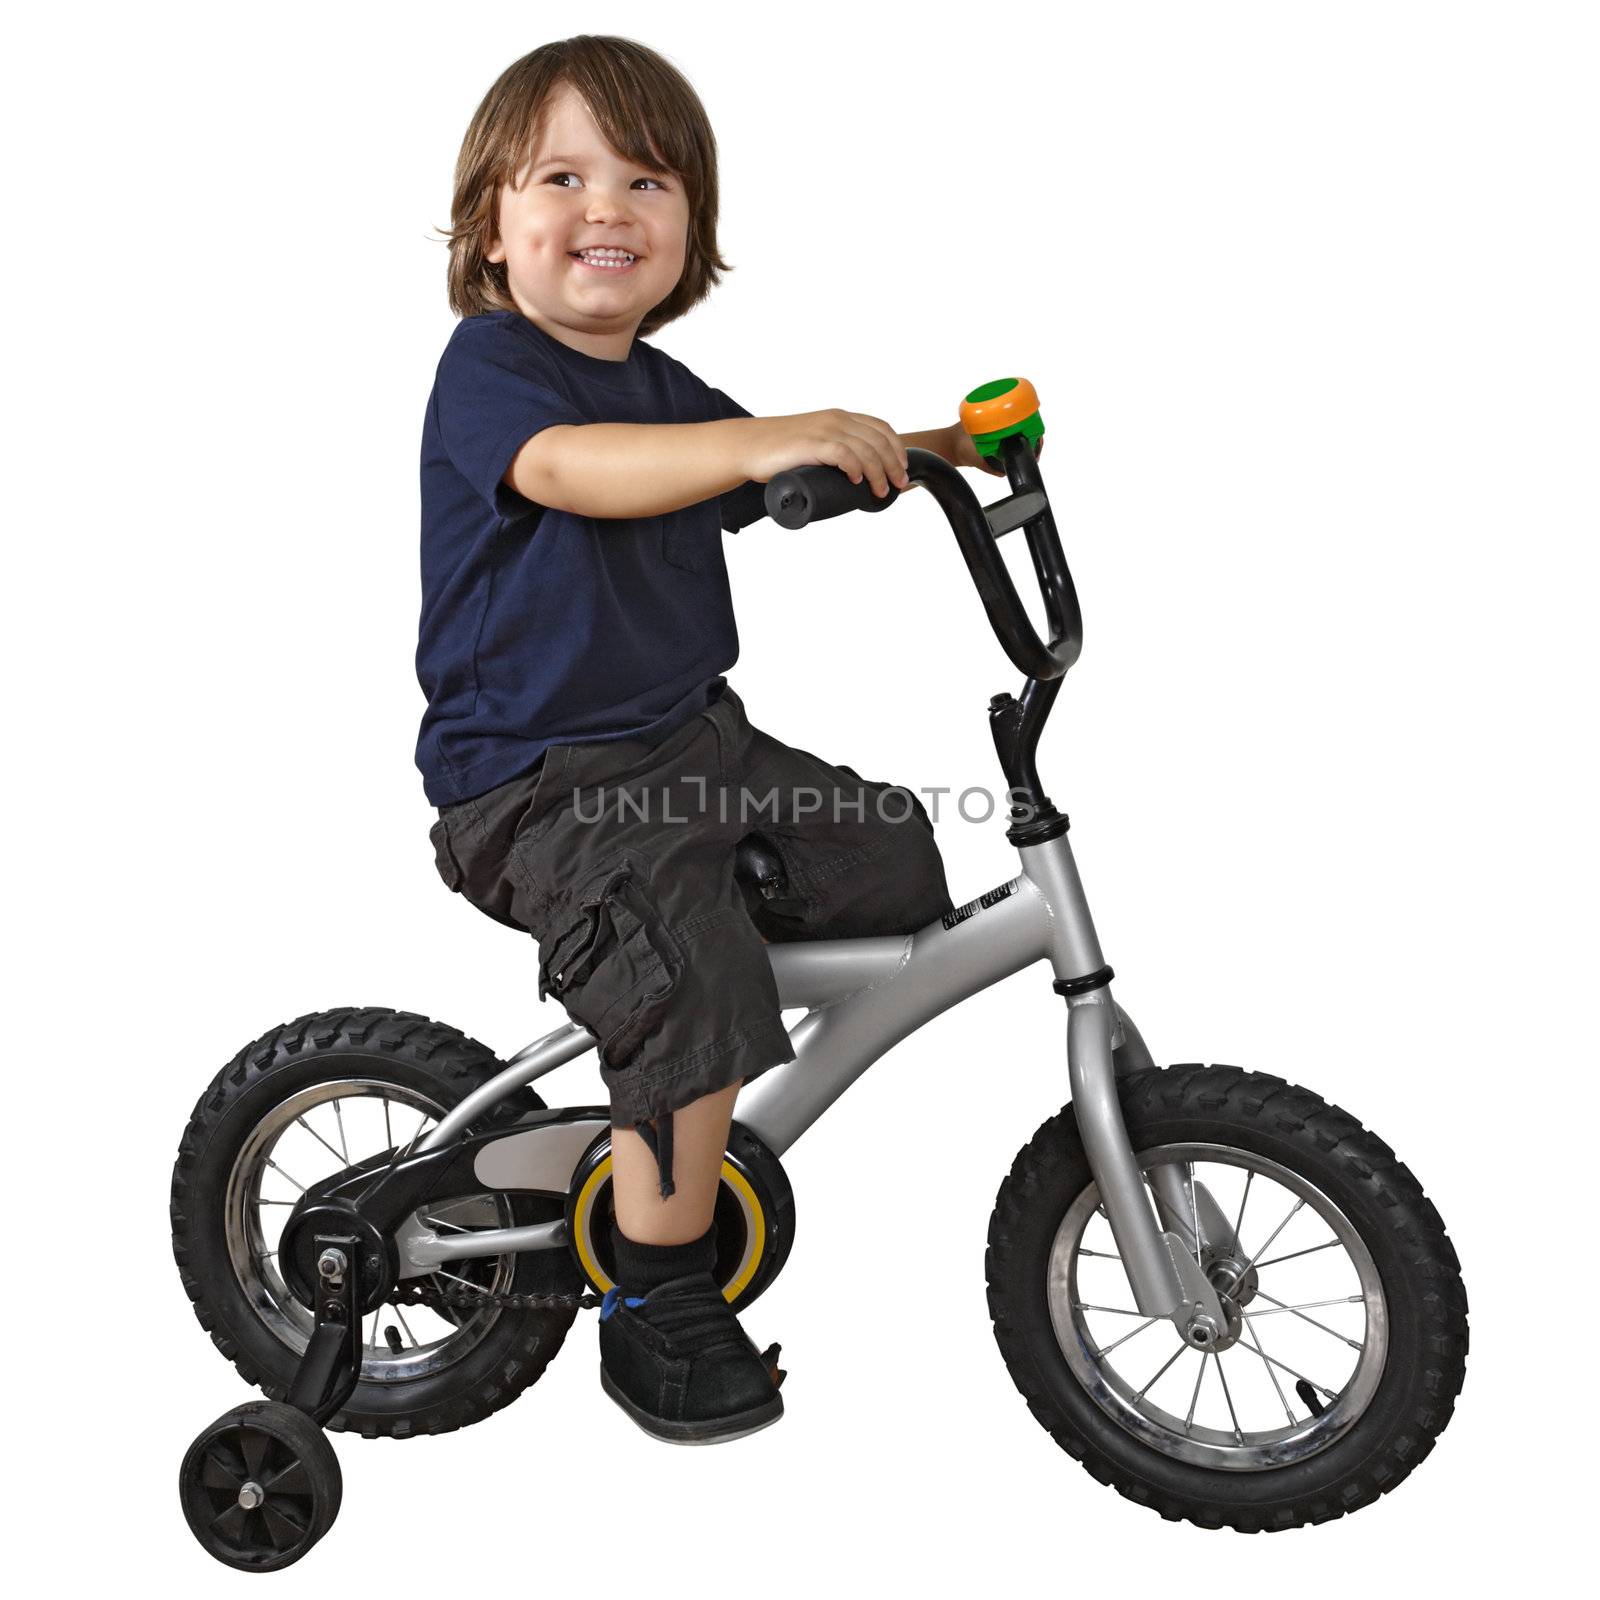 Cute boy riding bicycle by sumners